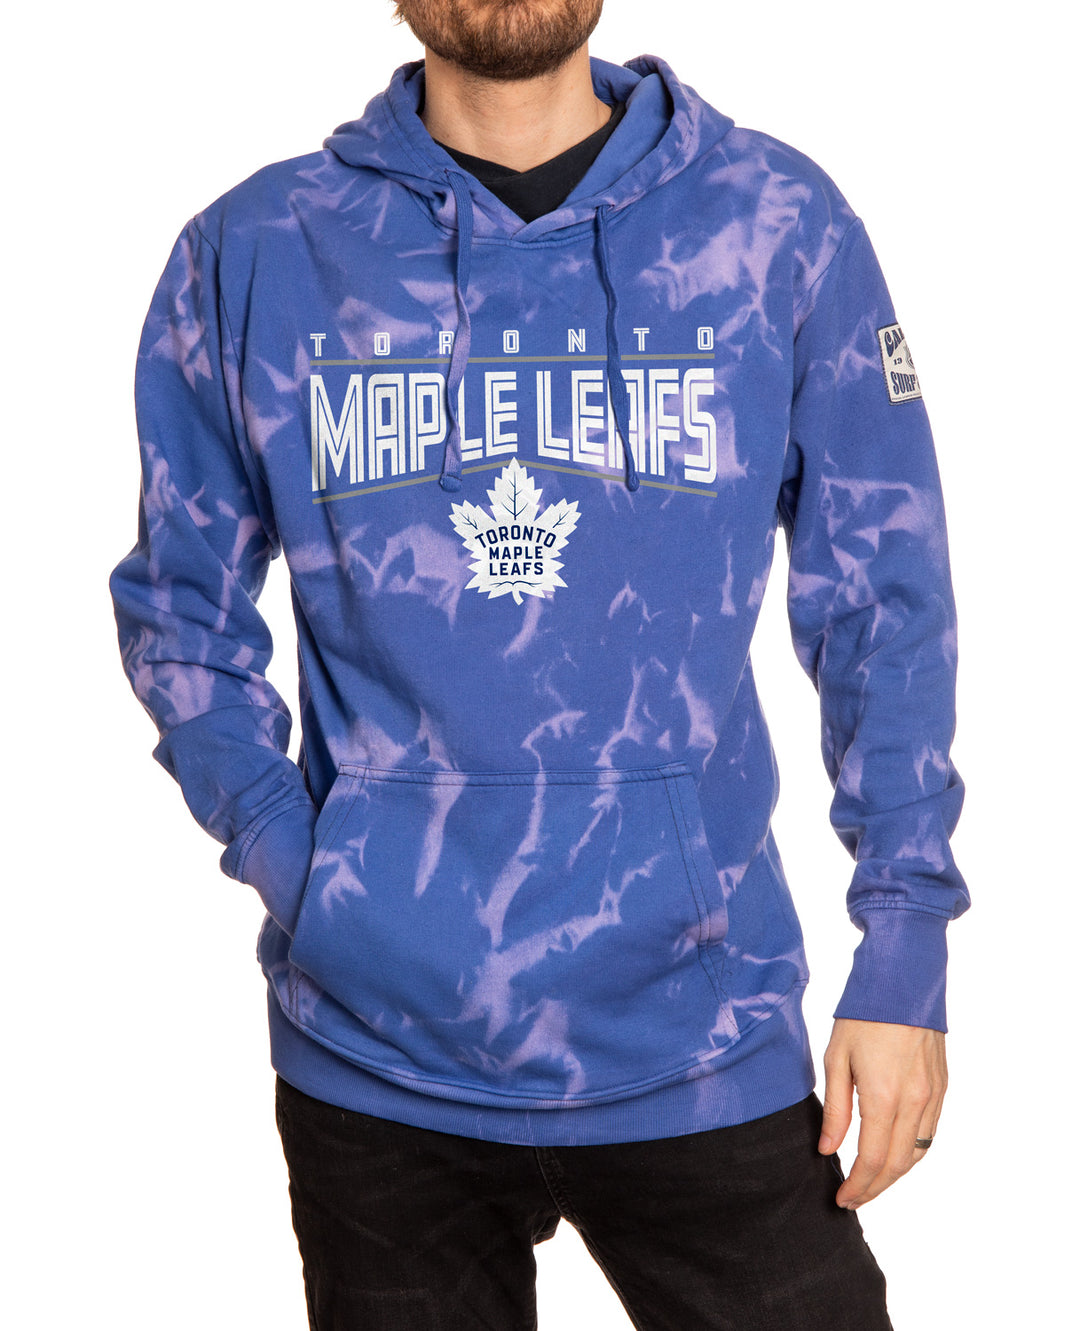 Top toronto Maple leafs X drew house shirt, hoodie, sweater and